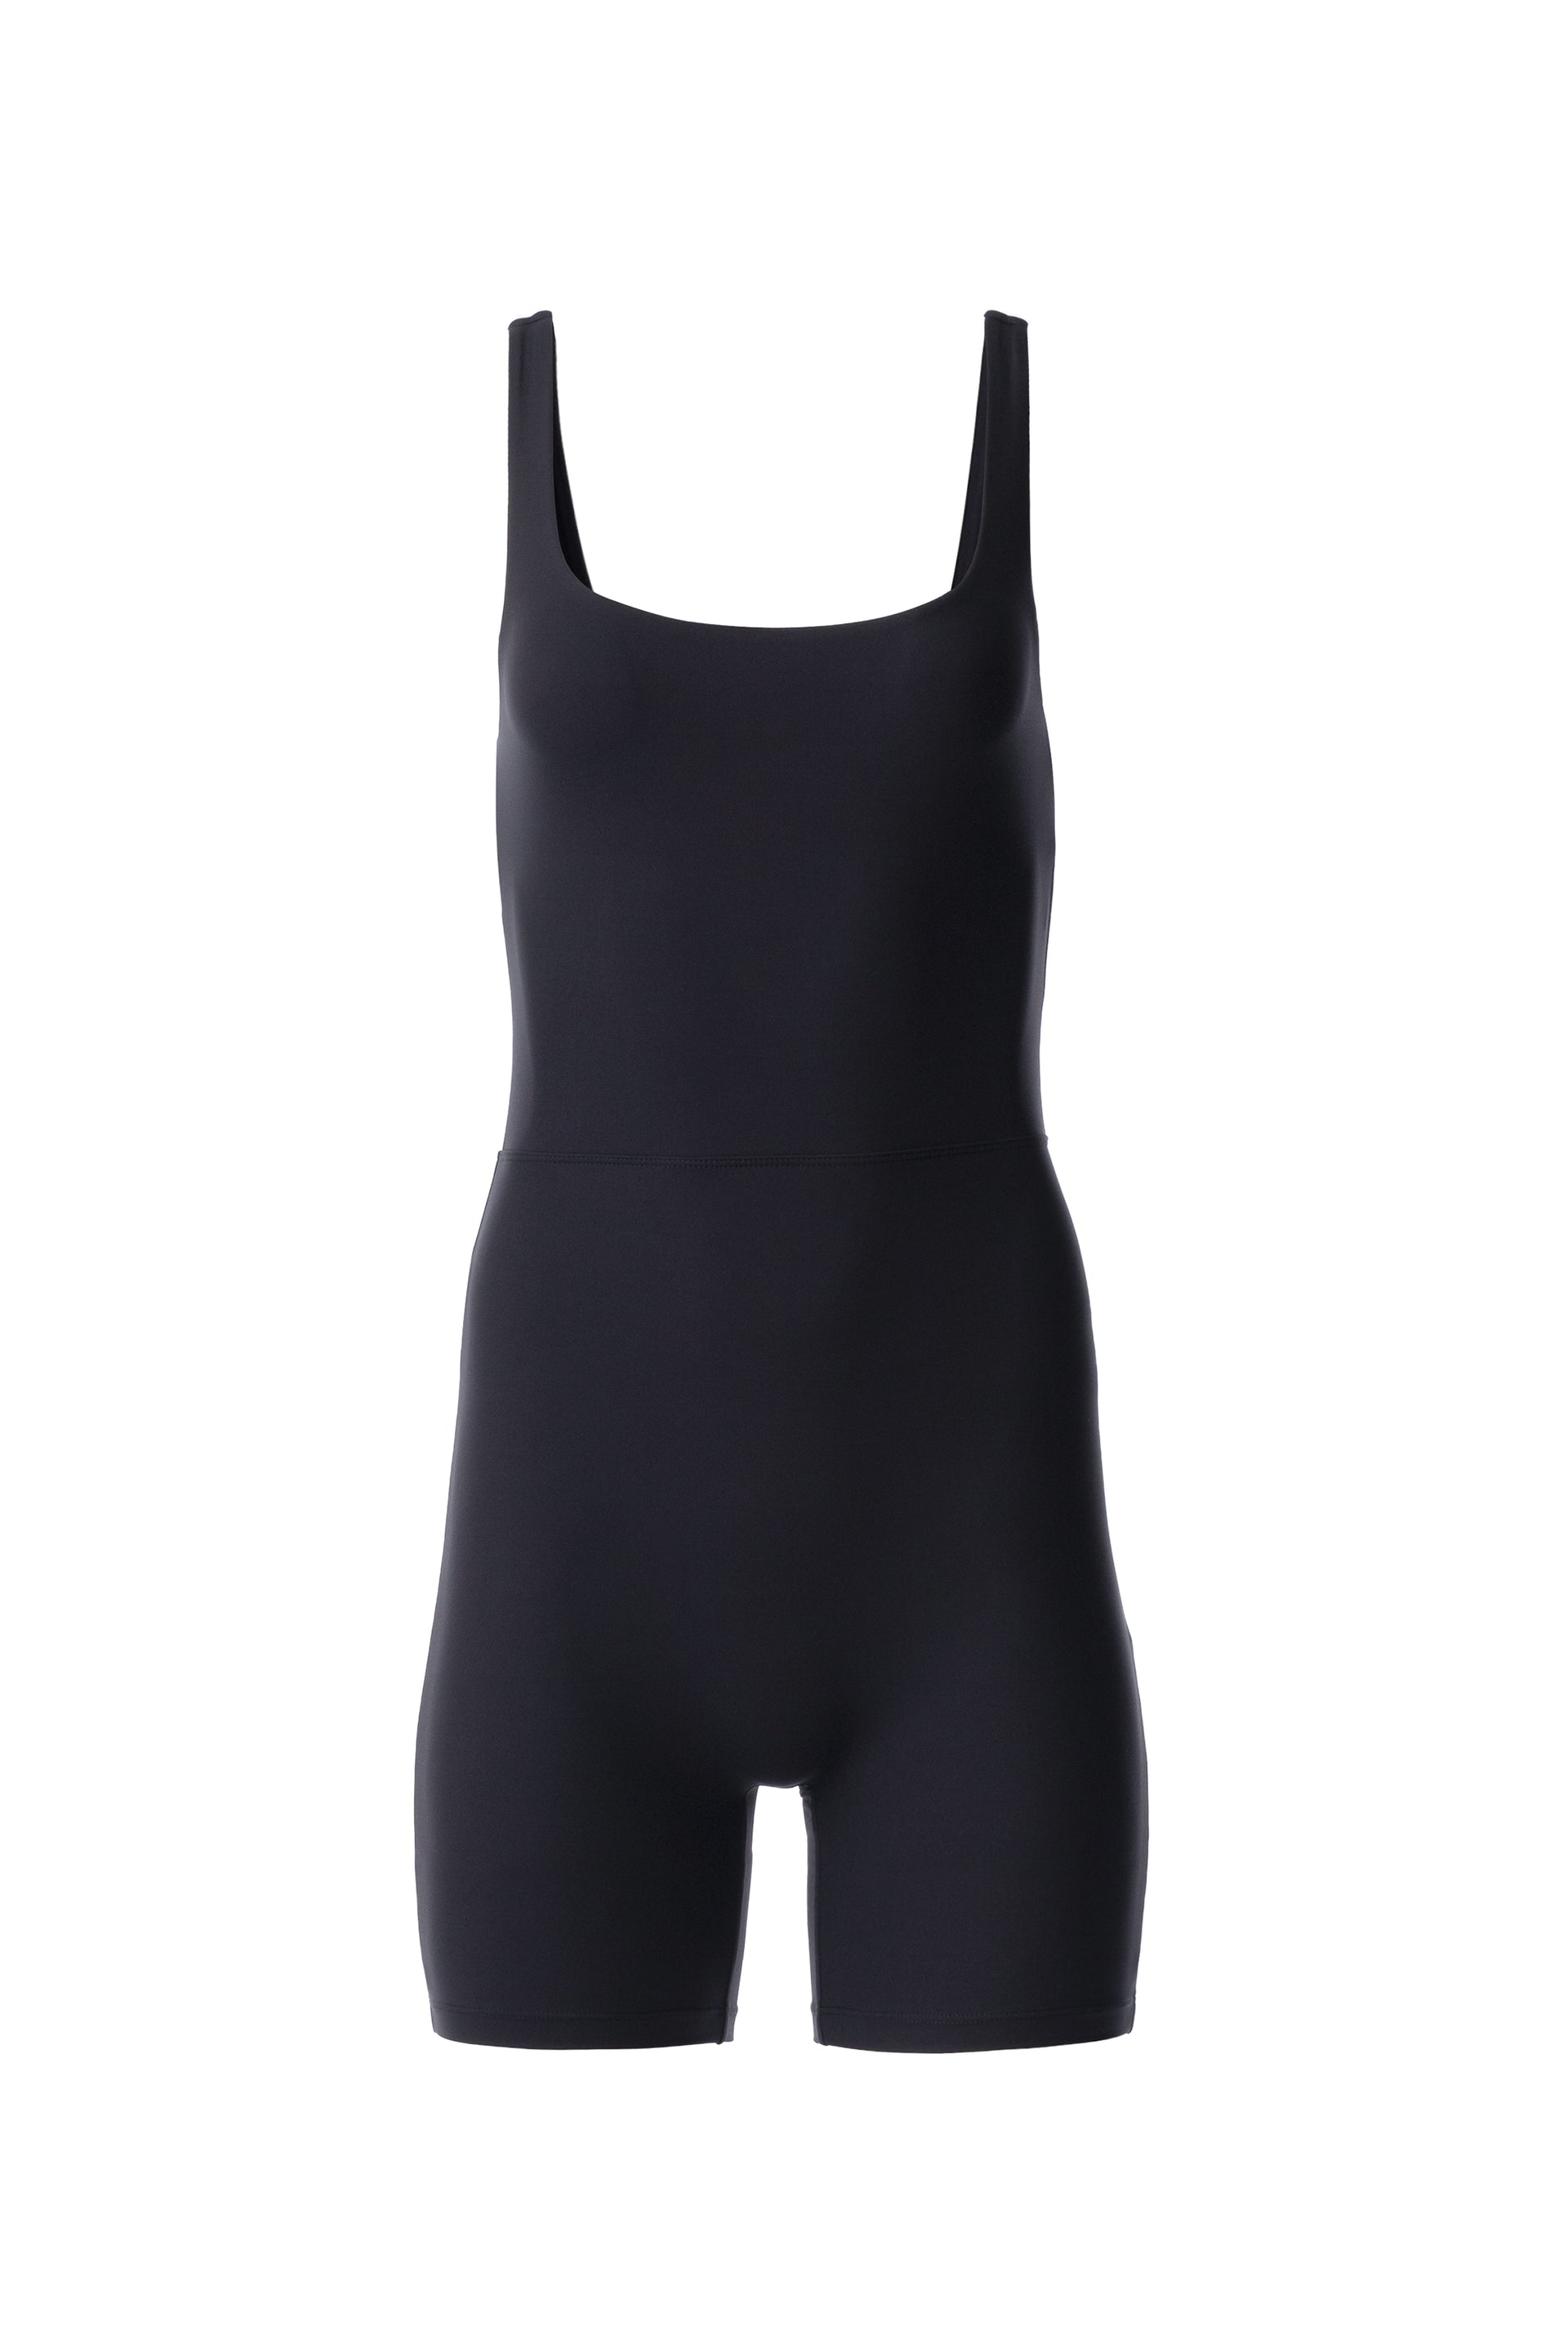 black full body suit, black full body suit Suppliers and Manufacturers at